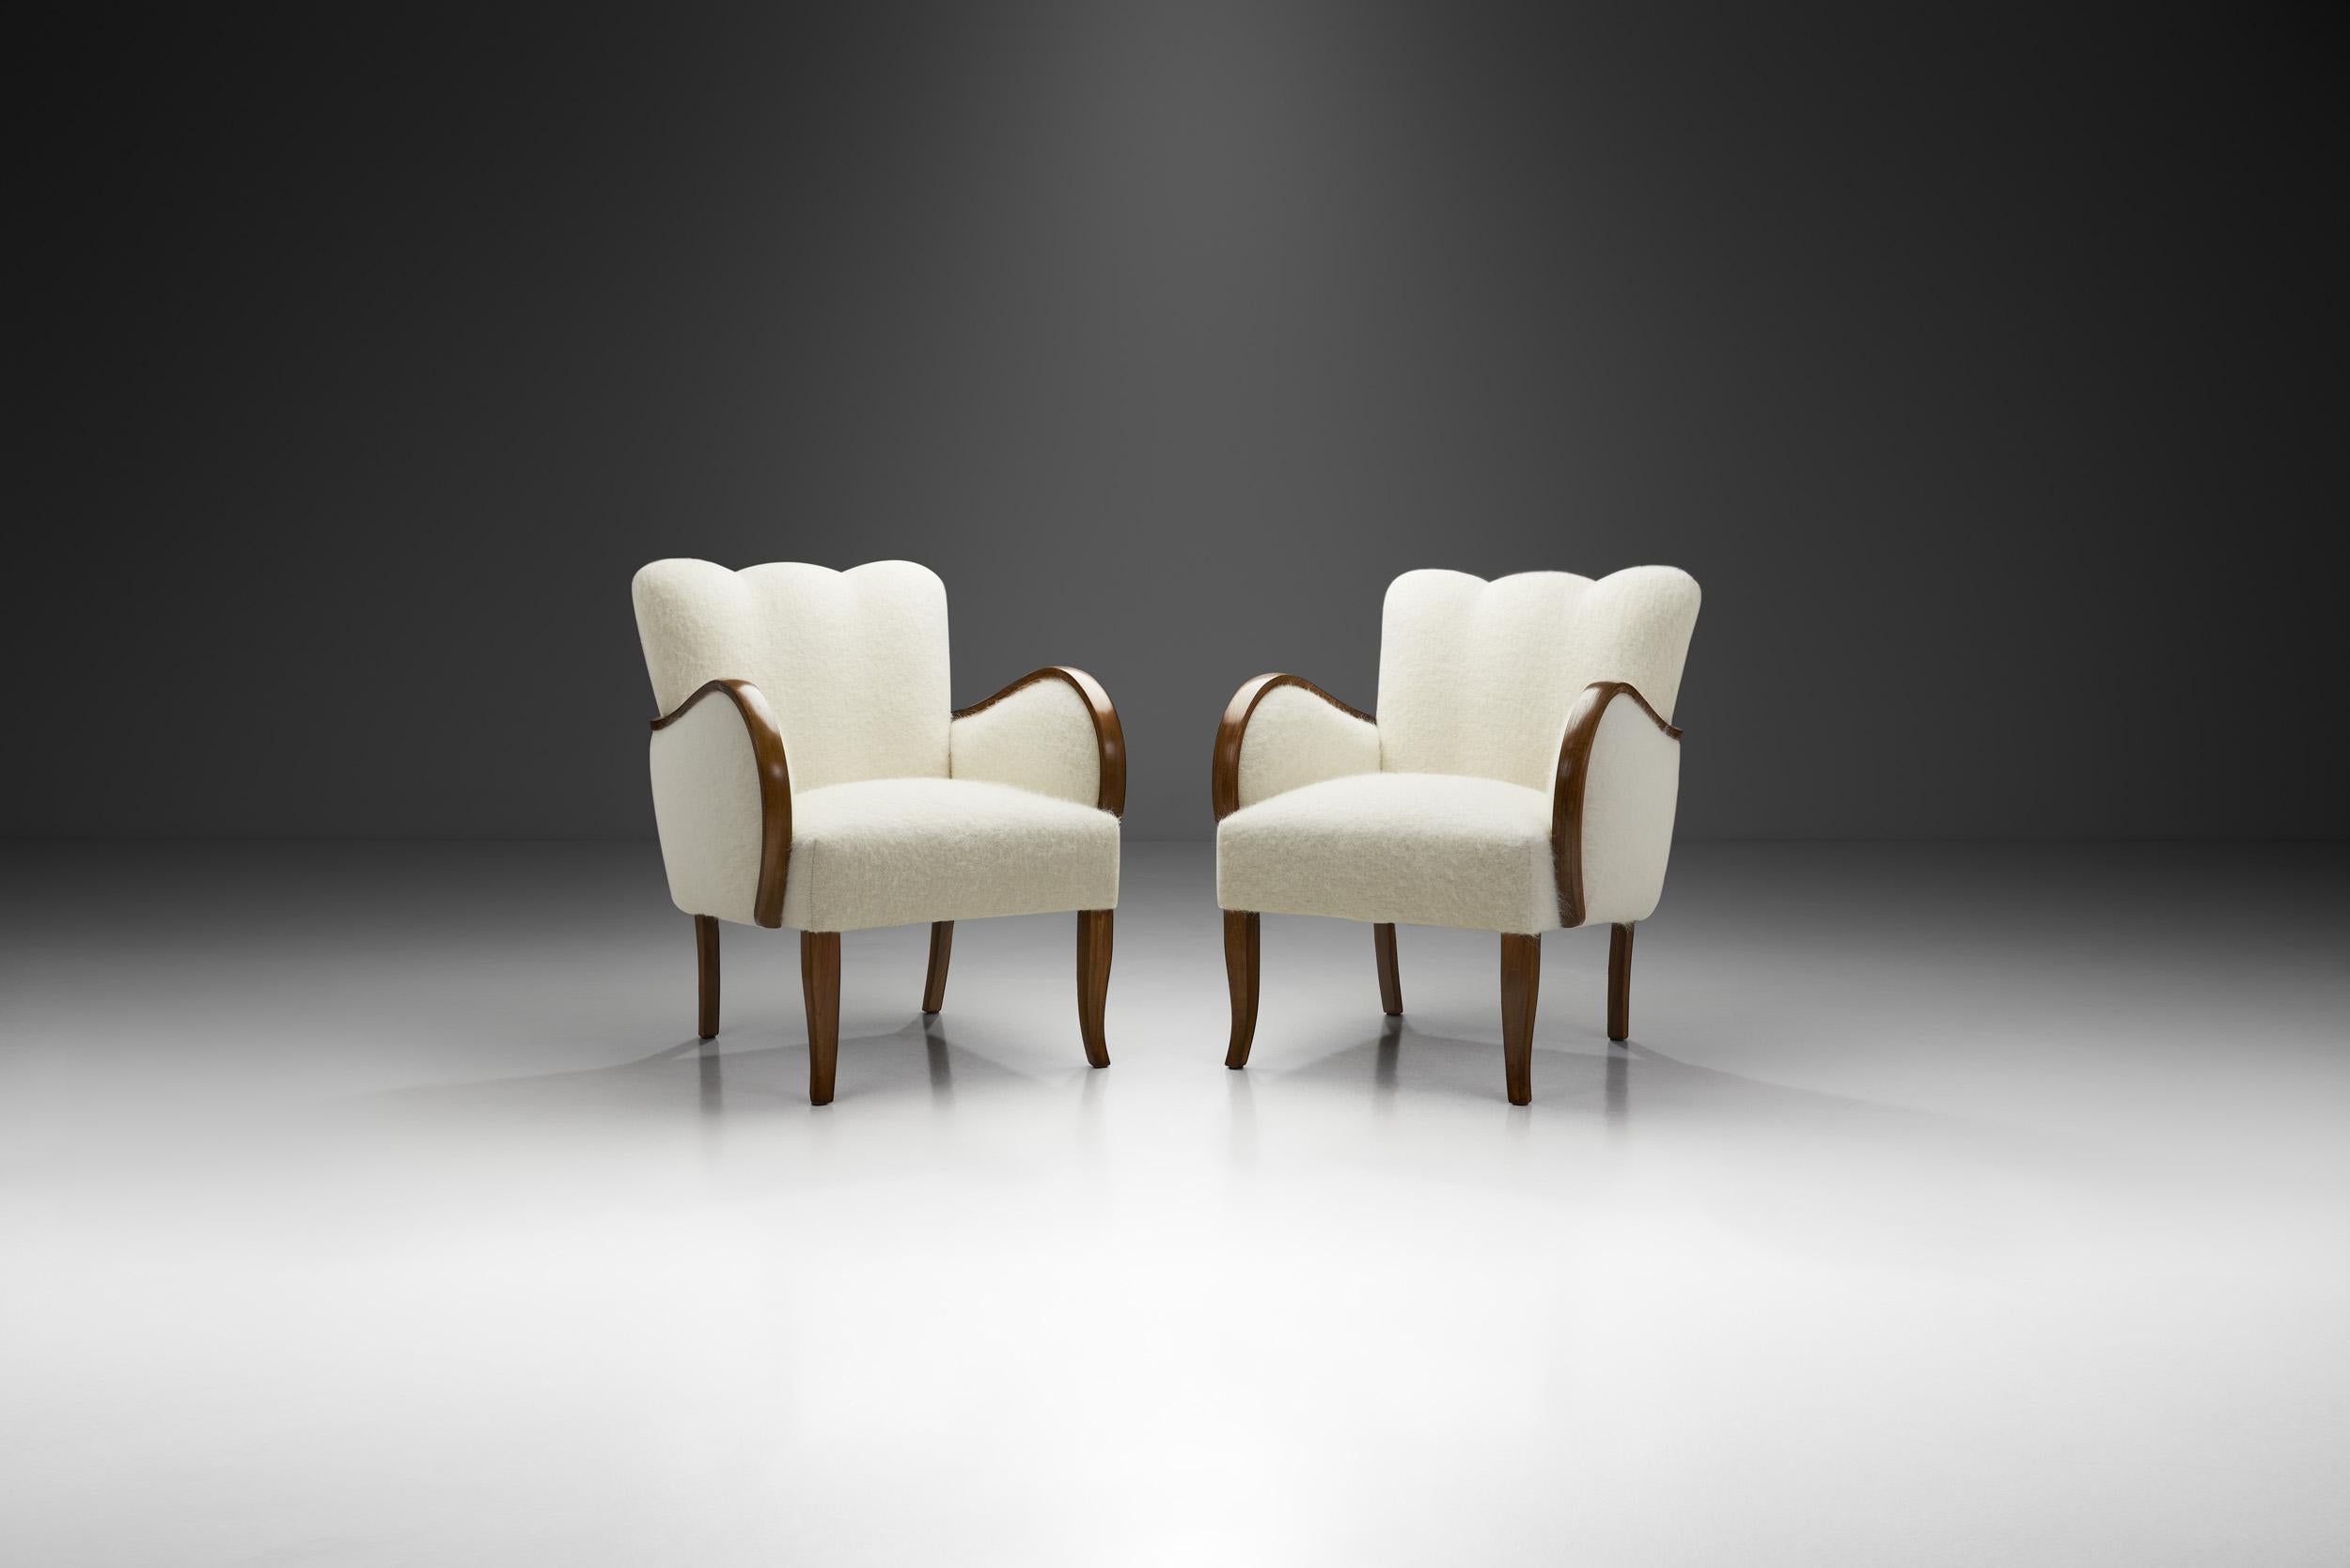 Simplicity, functionality, and elegance - these are the basic aspects of Danish design and, accordingly, of this pair of sophisticated easy chairs. The design dating from the early mid-century era, shows qualities of both Danish Art Deco and